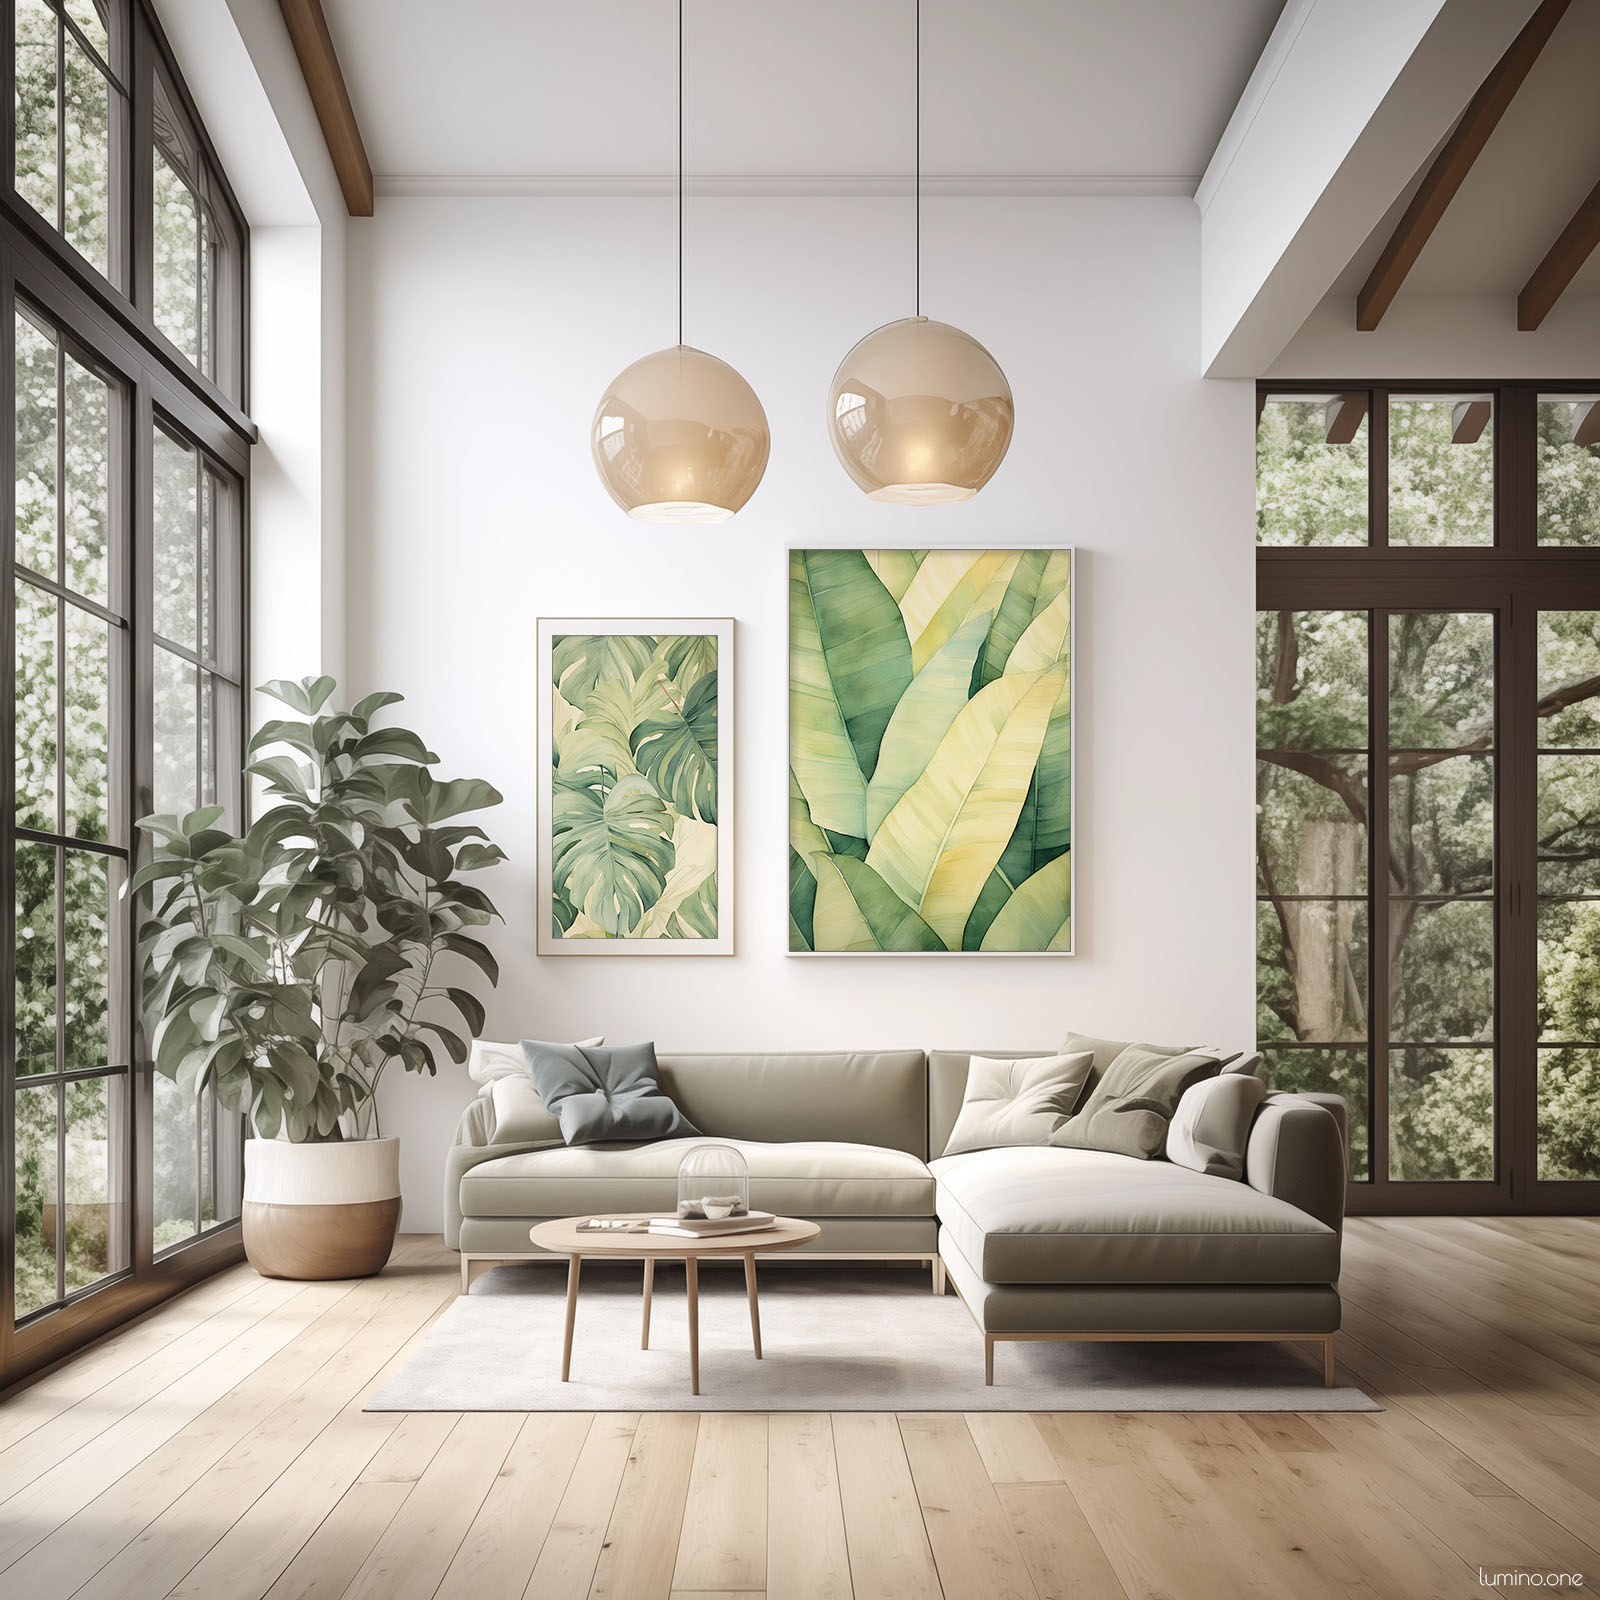 Tropical Art Gallery Wall in Spacious Living Room with Plants and High Ceilings